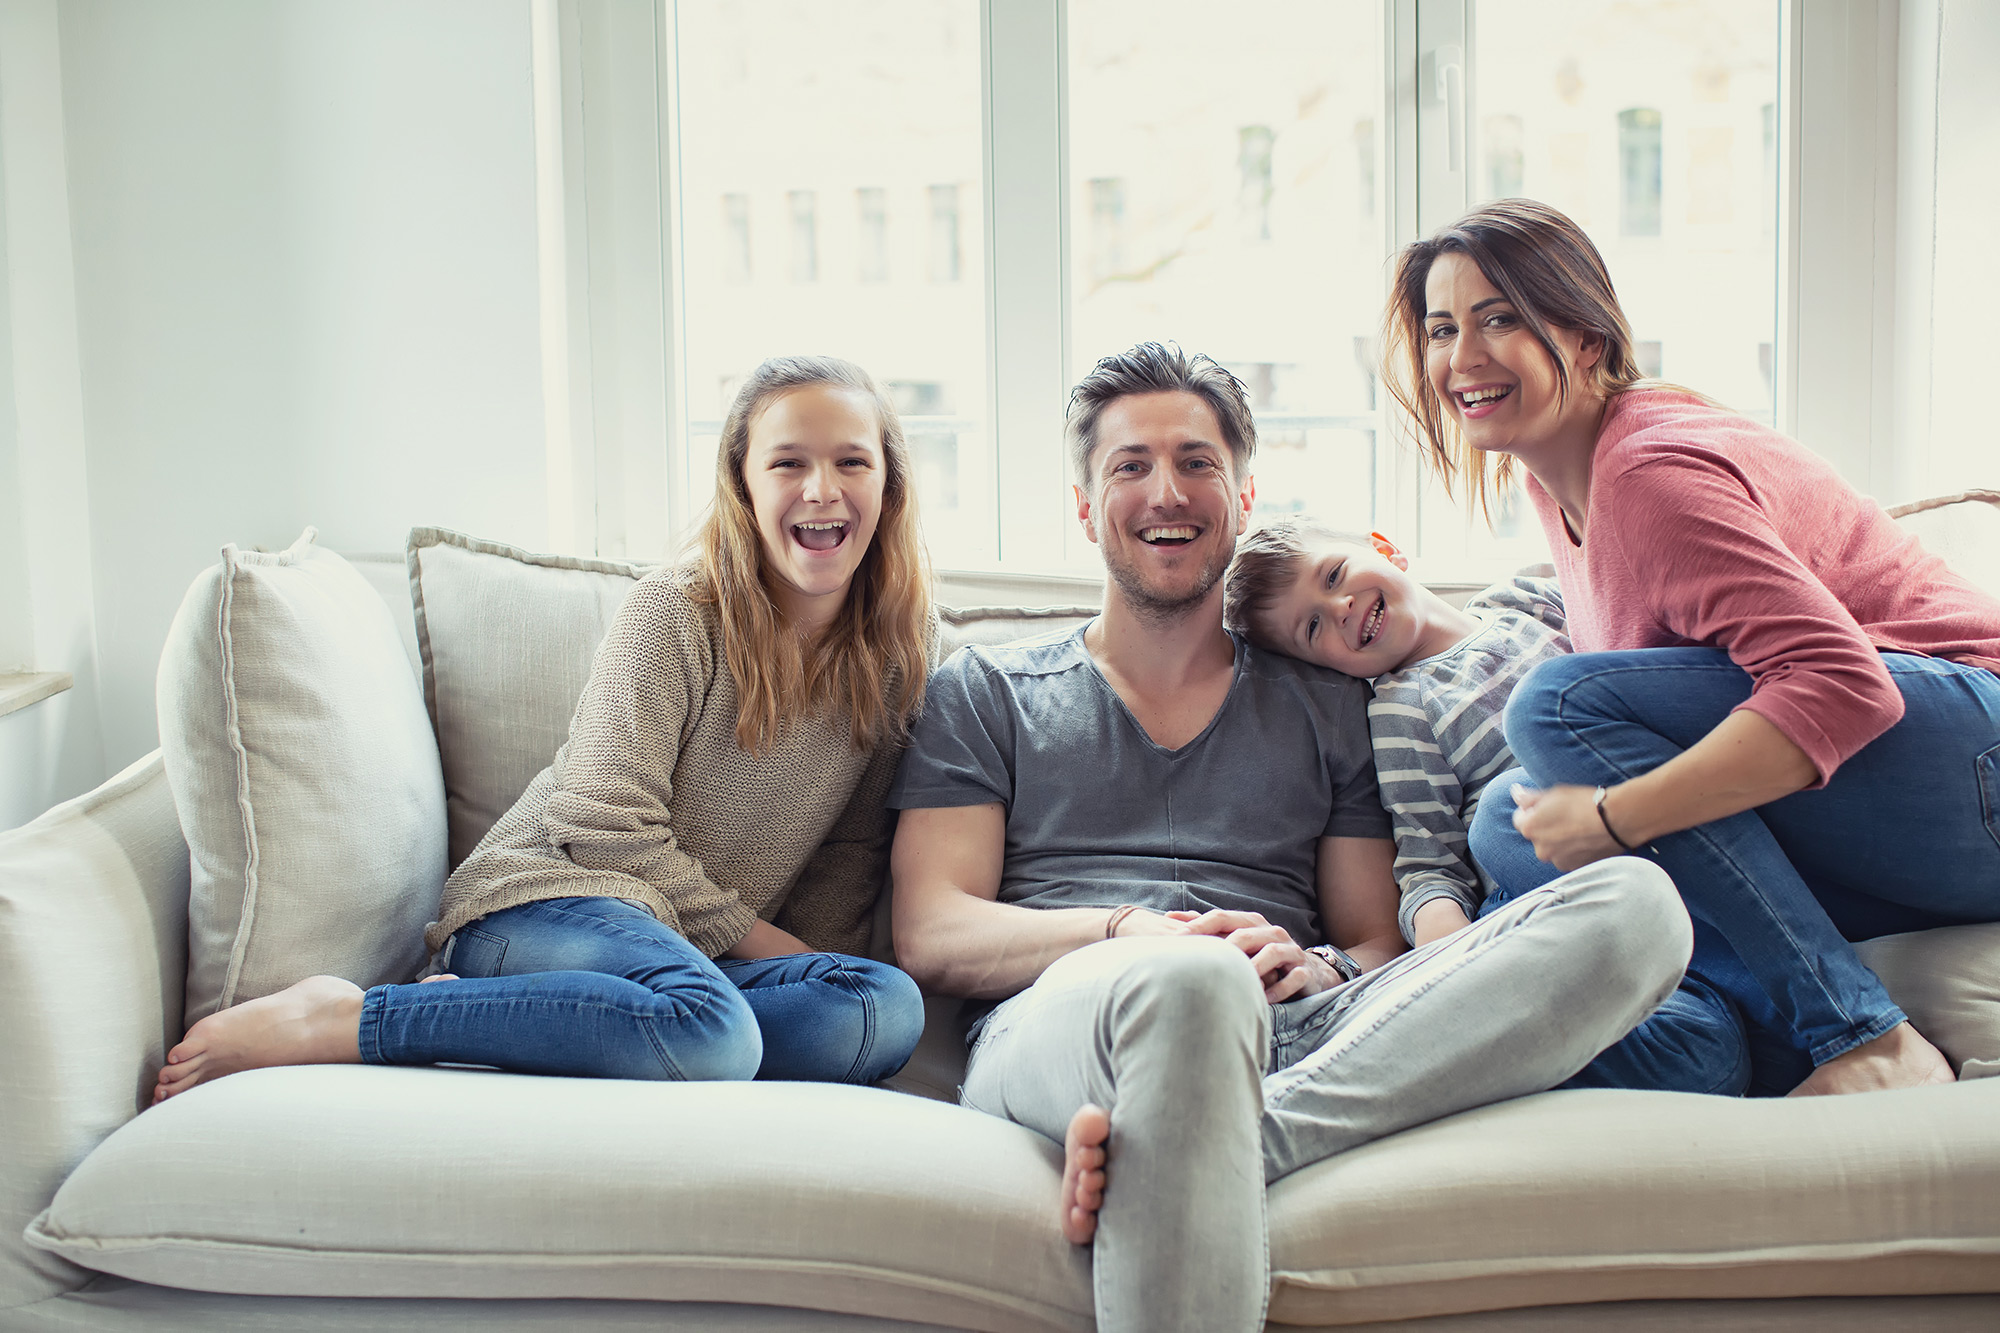 Happy family on couch enjoying a comfortable, sustainable home